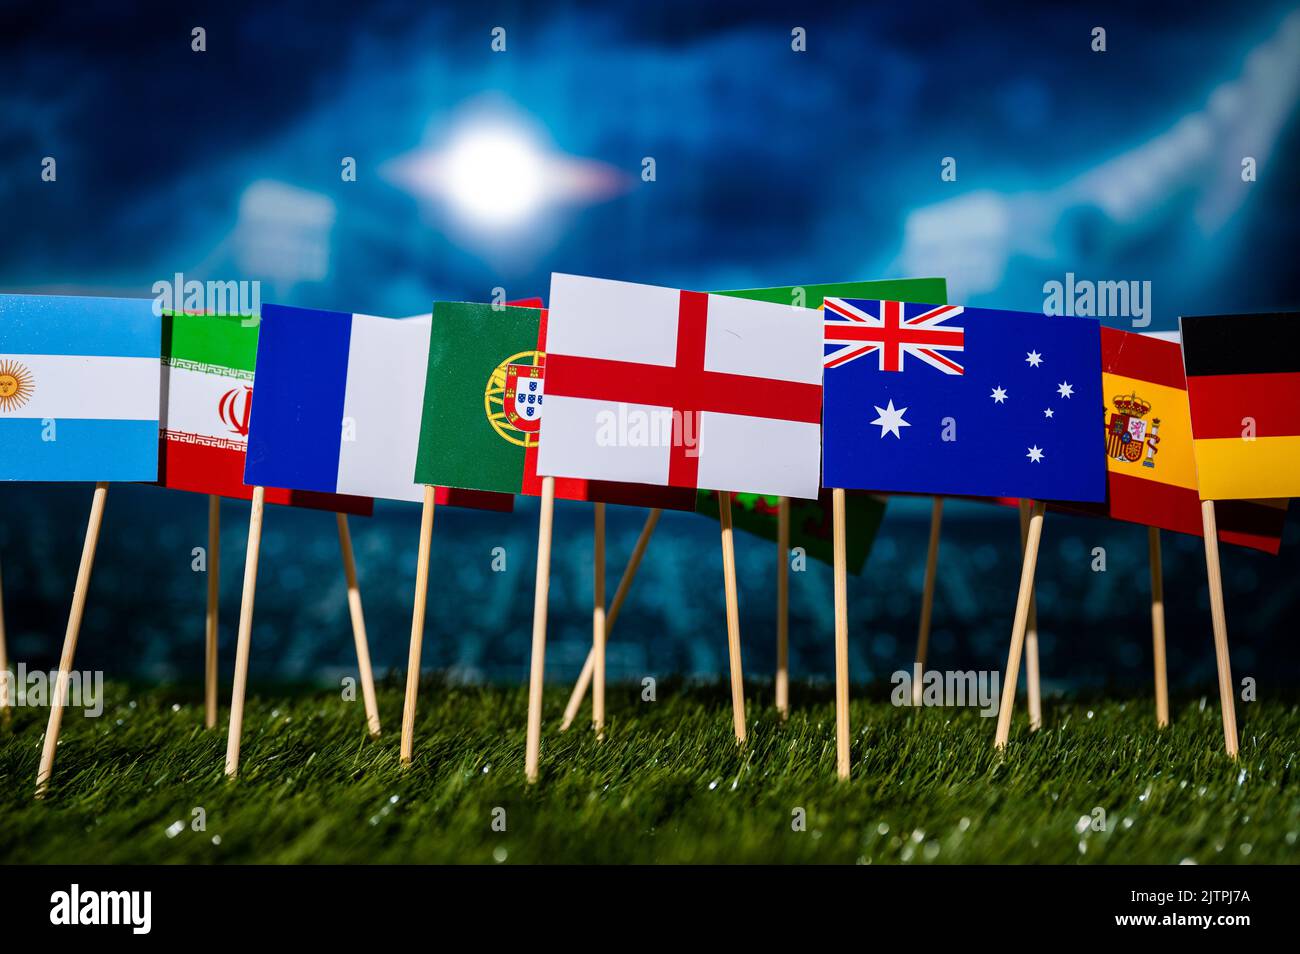 England National Flag and others Flags of football Countries on Green Grass. Sport Wallpaper for Tournament in Qatar Stock Photo